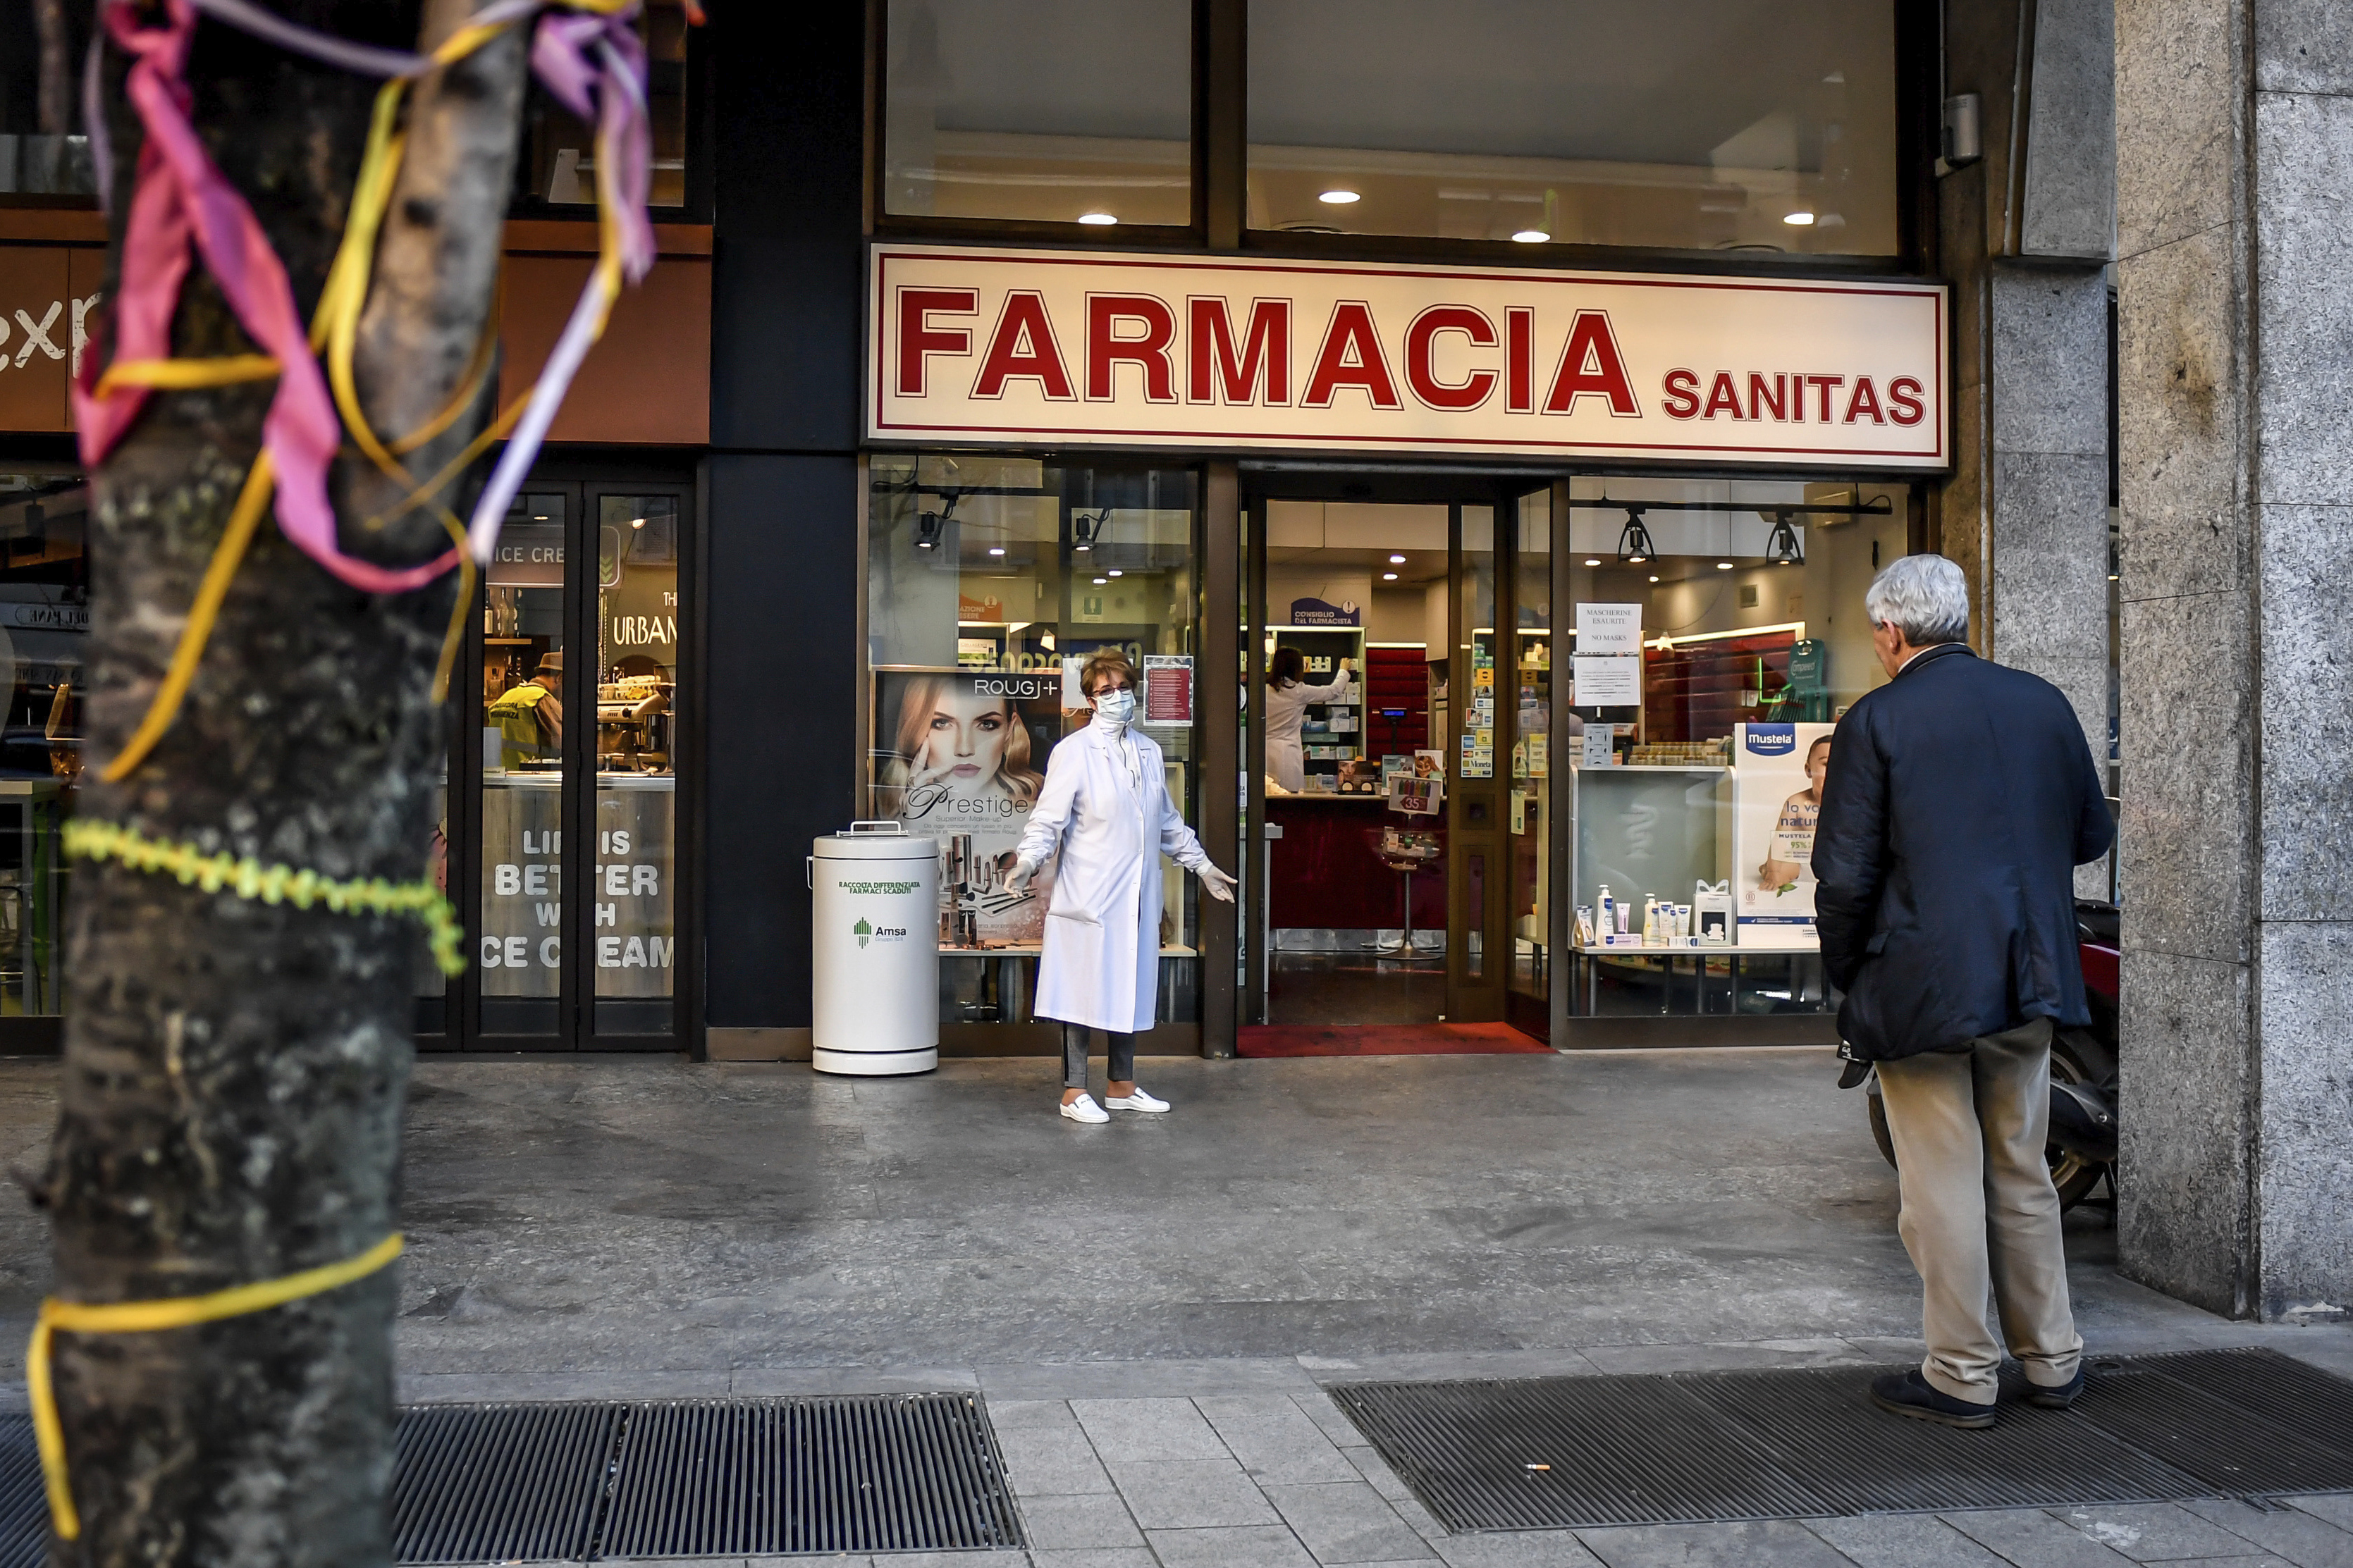 A pharmacist wears a mask as she speaks to a man keeping his distance, outside a pharmacy in Milan, Italy, Wednesday, March 11, 2020. Picture: Claudio Furlan